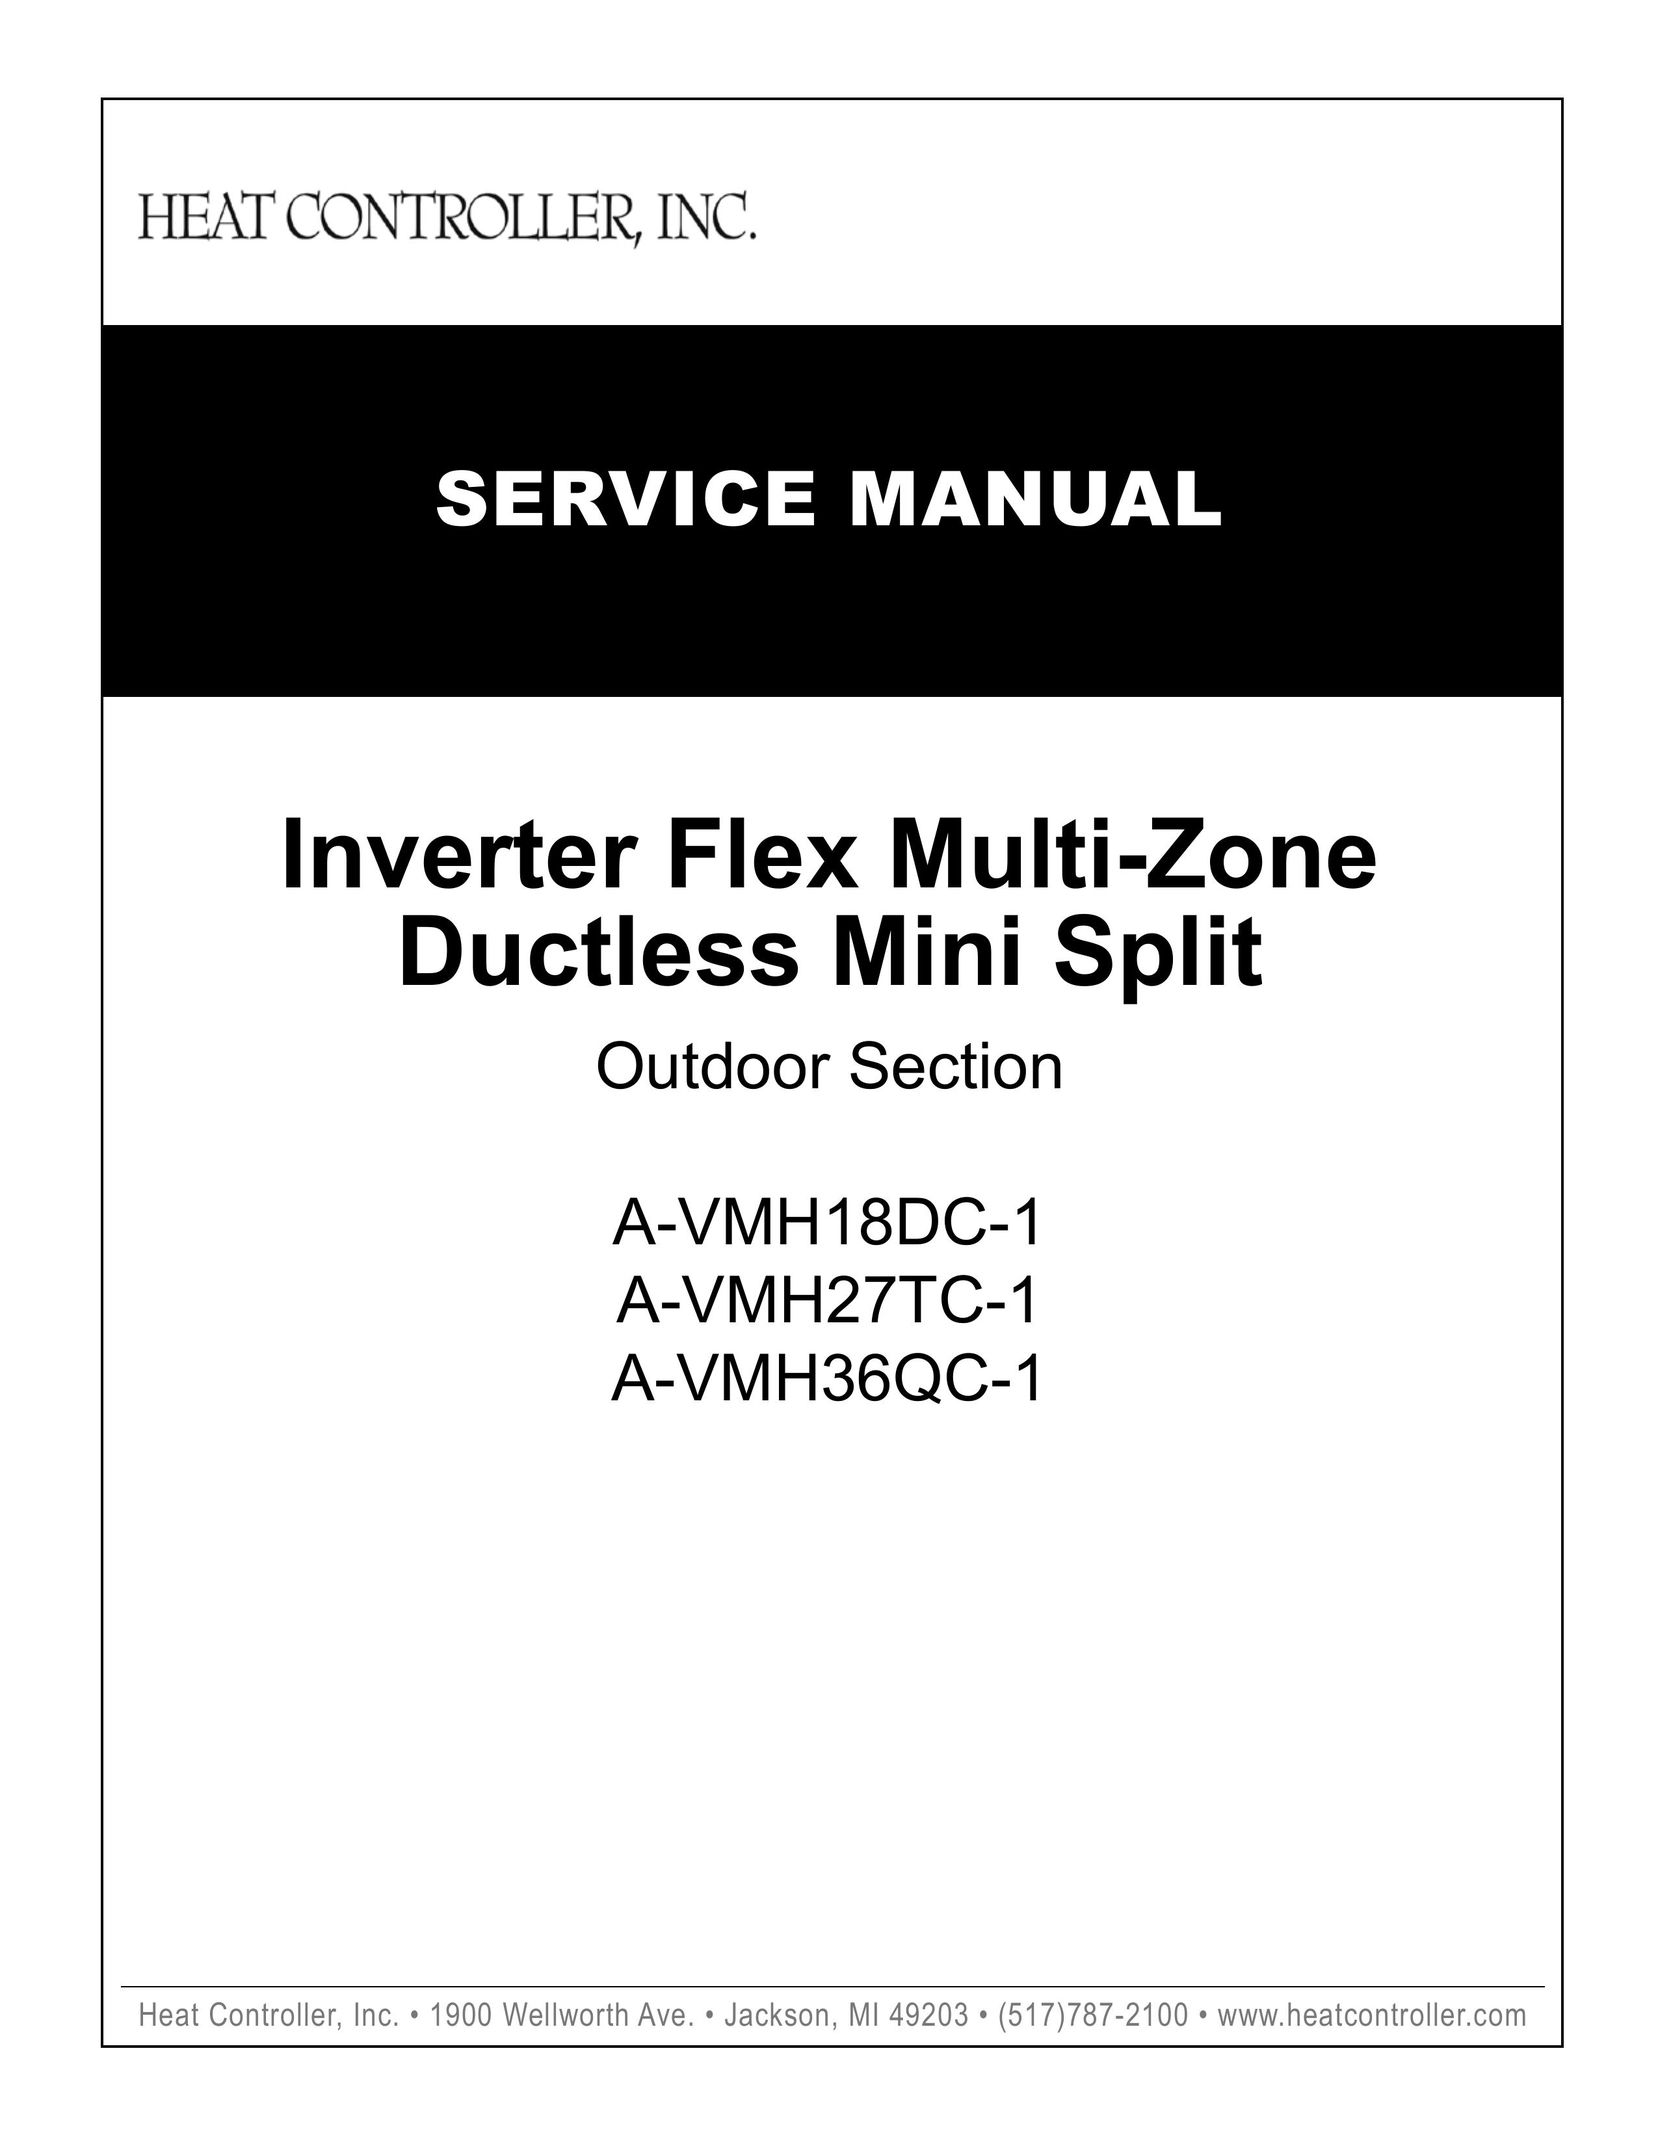 Heat Controller A-VMH27TC-1 Air Conditioner User Manual